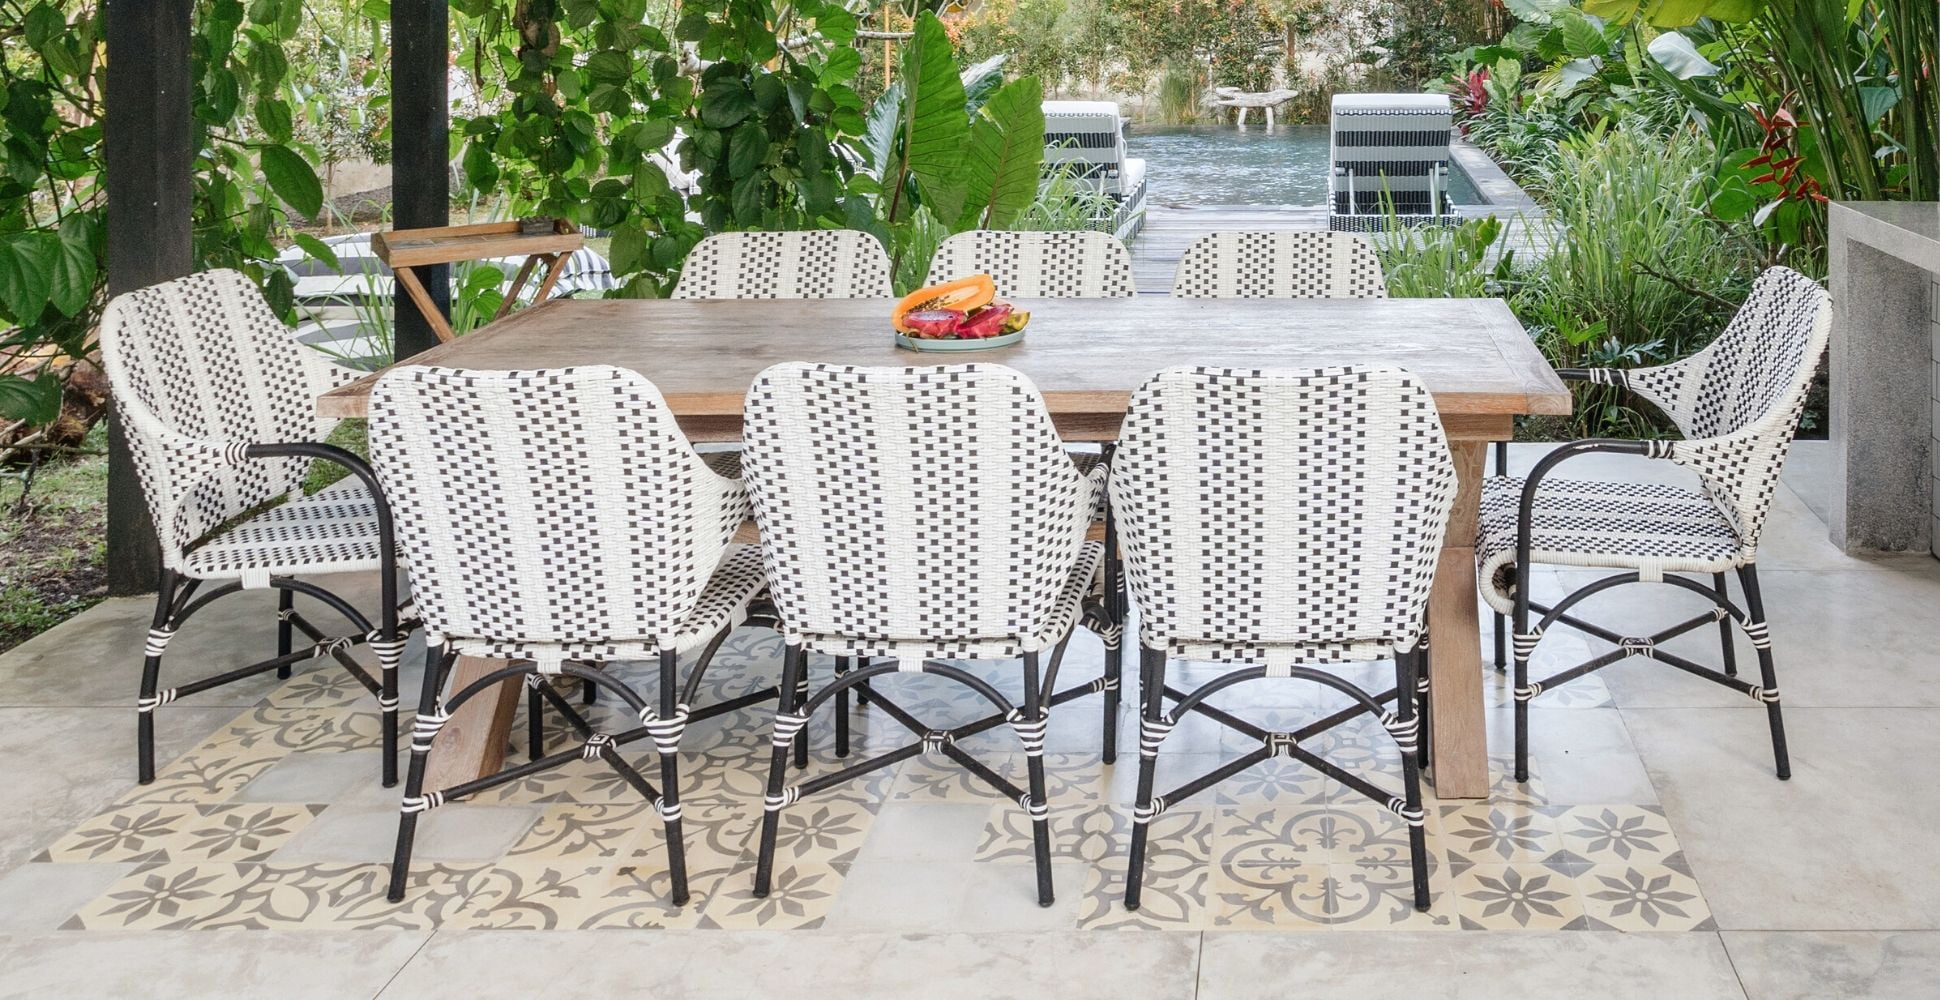 5 Best Rattan Dining Chairs UK (Sept 2020 Review)